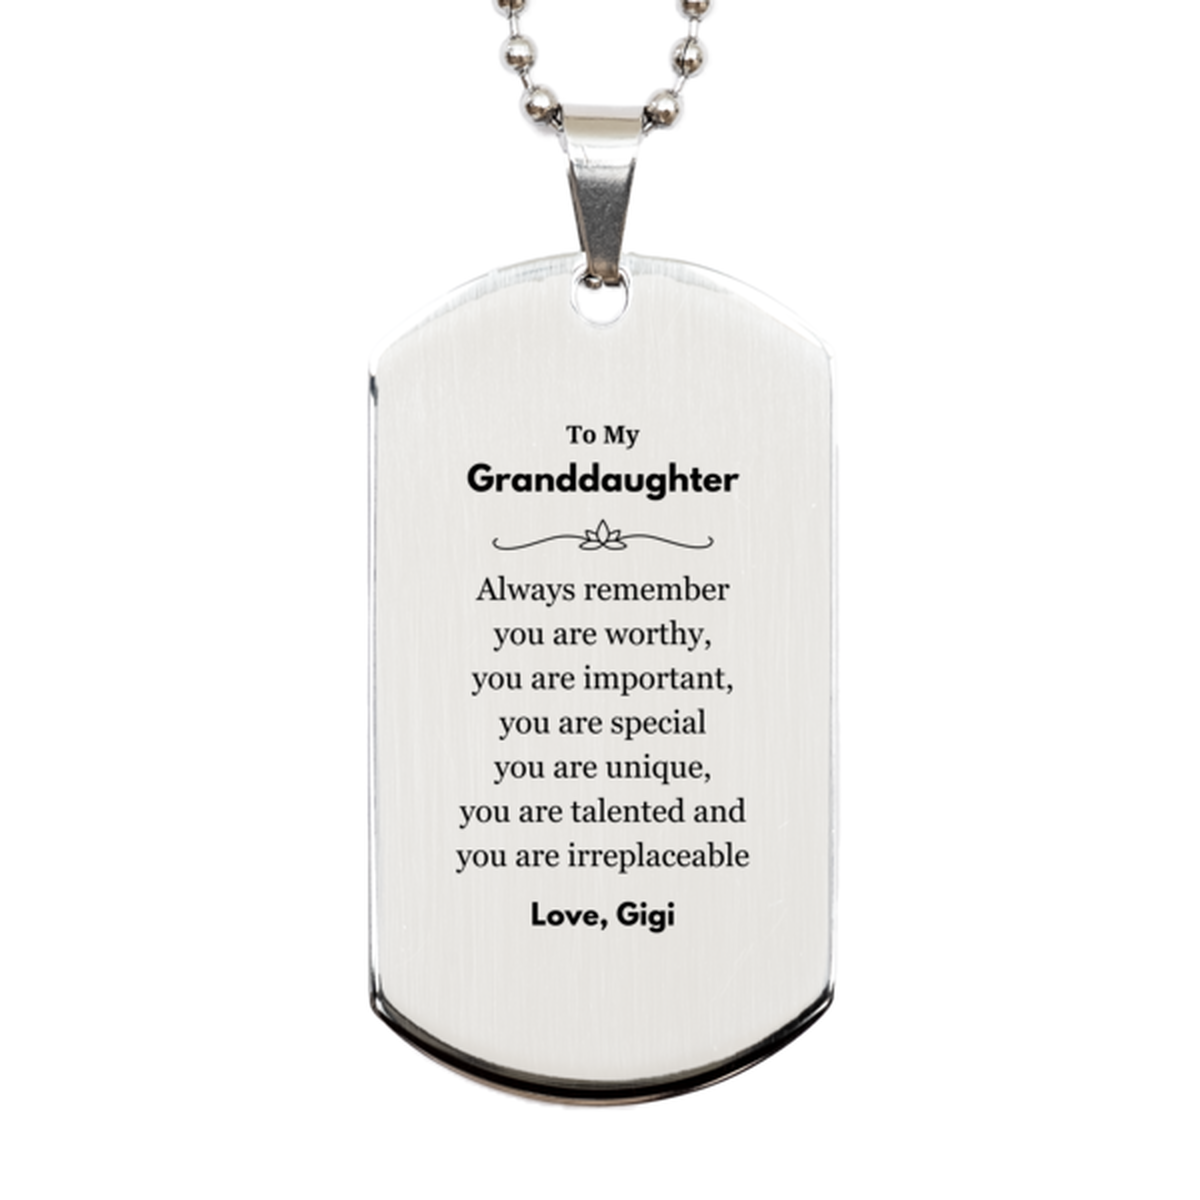 Granddaughter Birthday Gifts from Gigi, Inspirational Silver Dog Tag for Granddaughter Christmas Graduation Gifts for Granddaughter Always remember you are worthy, you are important. Love, Gigi